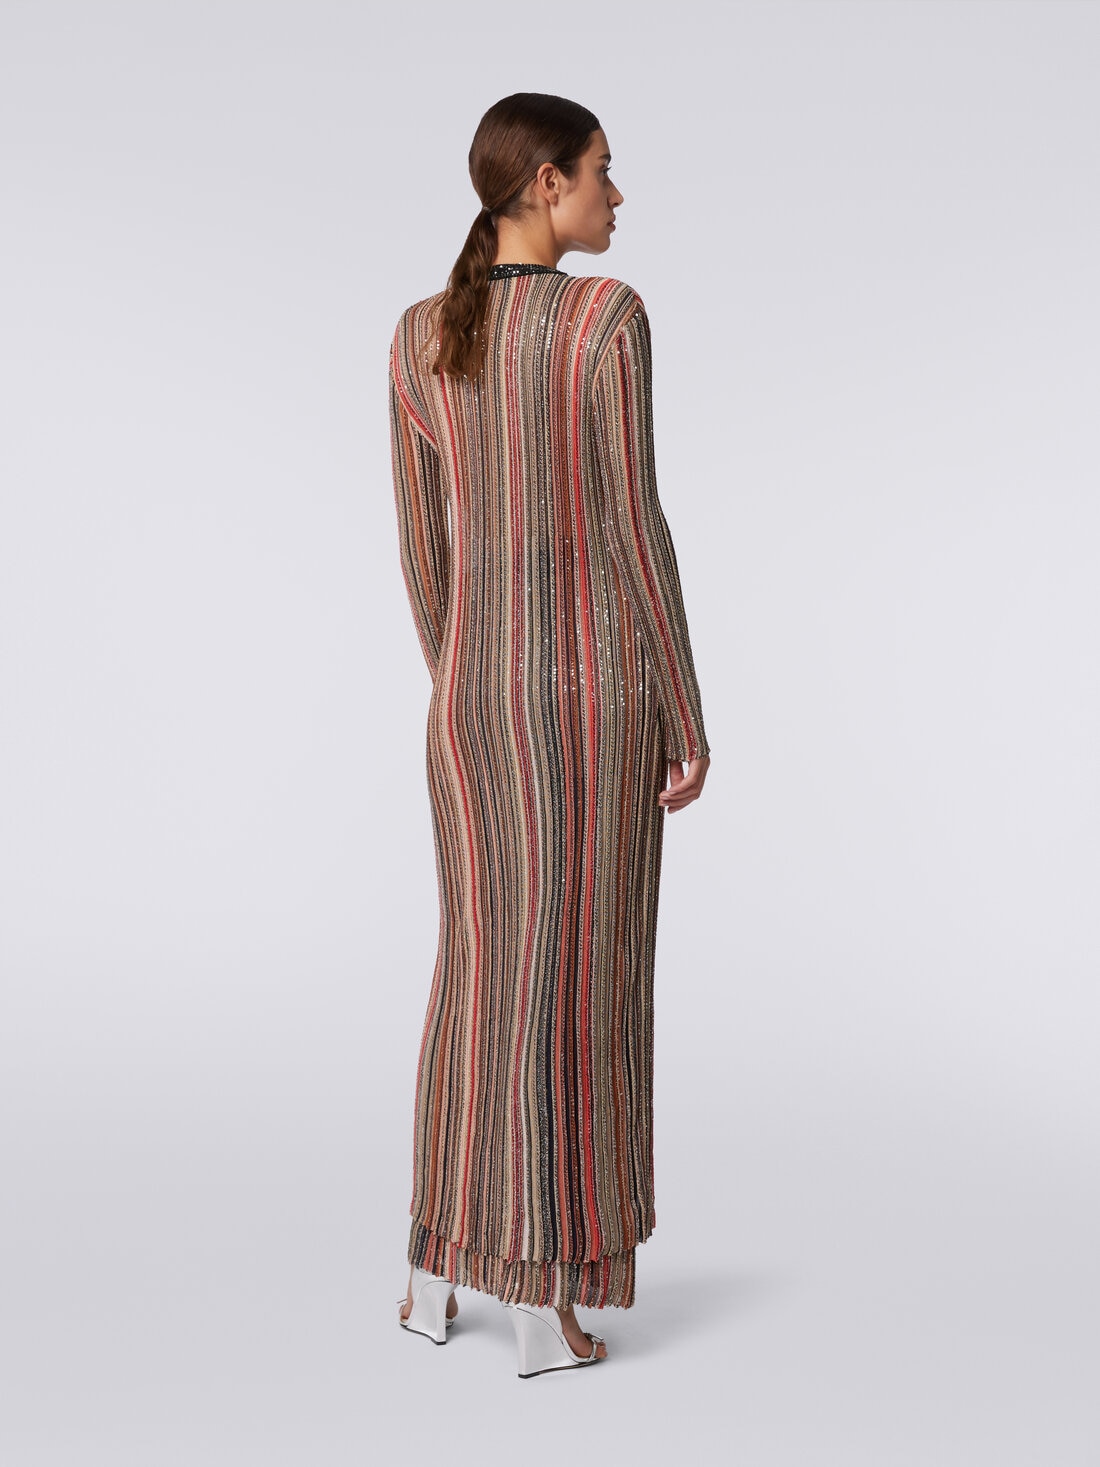 Long cardigan in vertical striped knit with sequins, Multicoloured  - DS24SM0ZBK033MSM9AF - 3